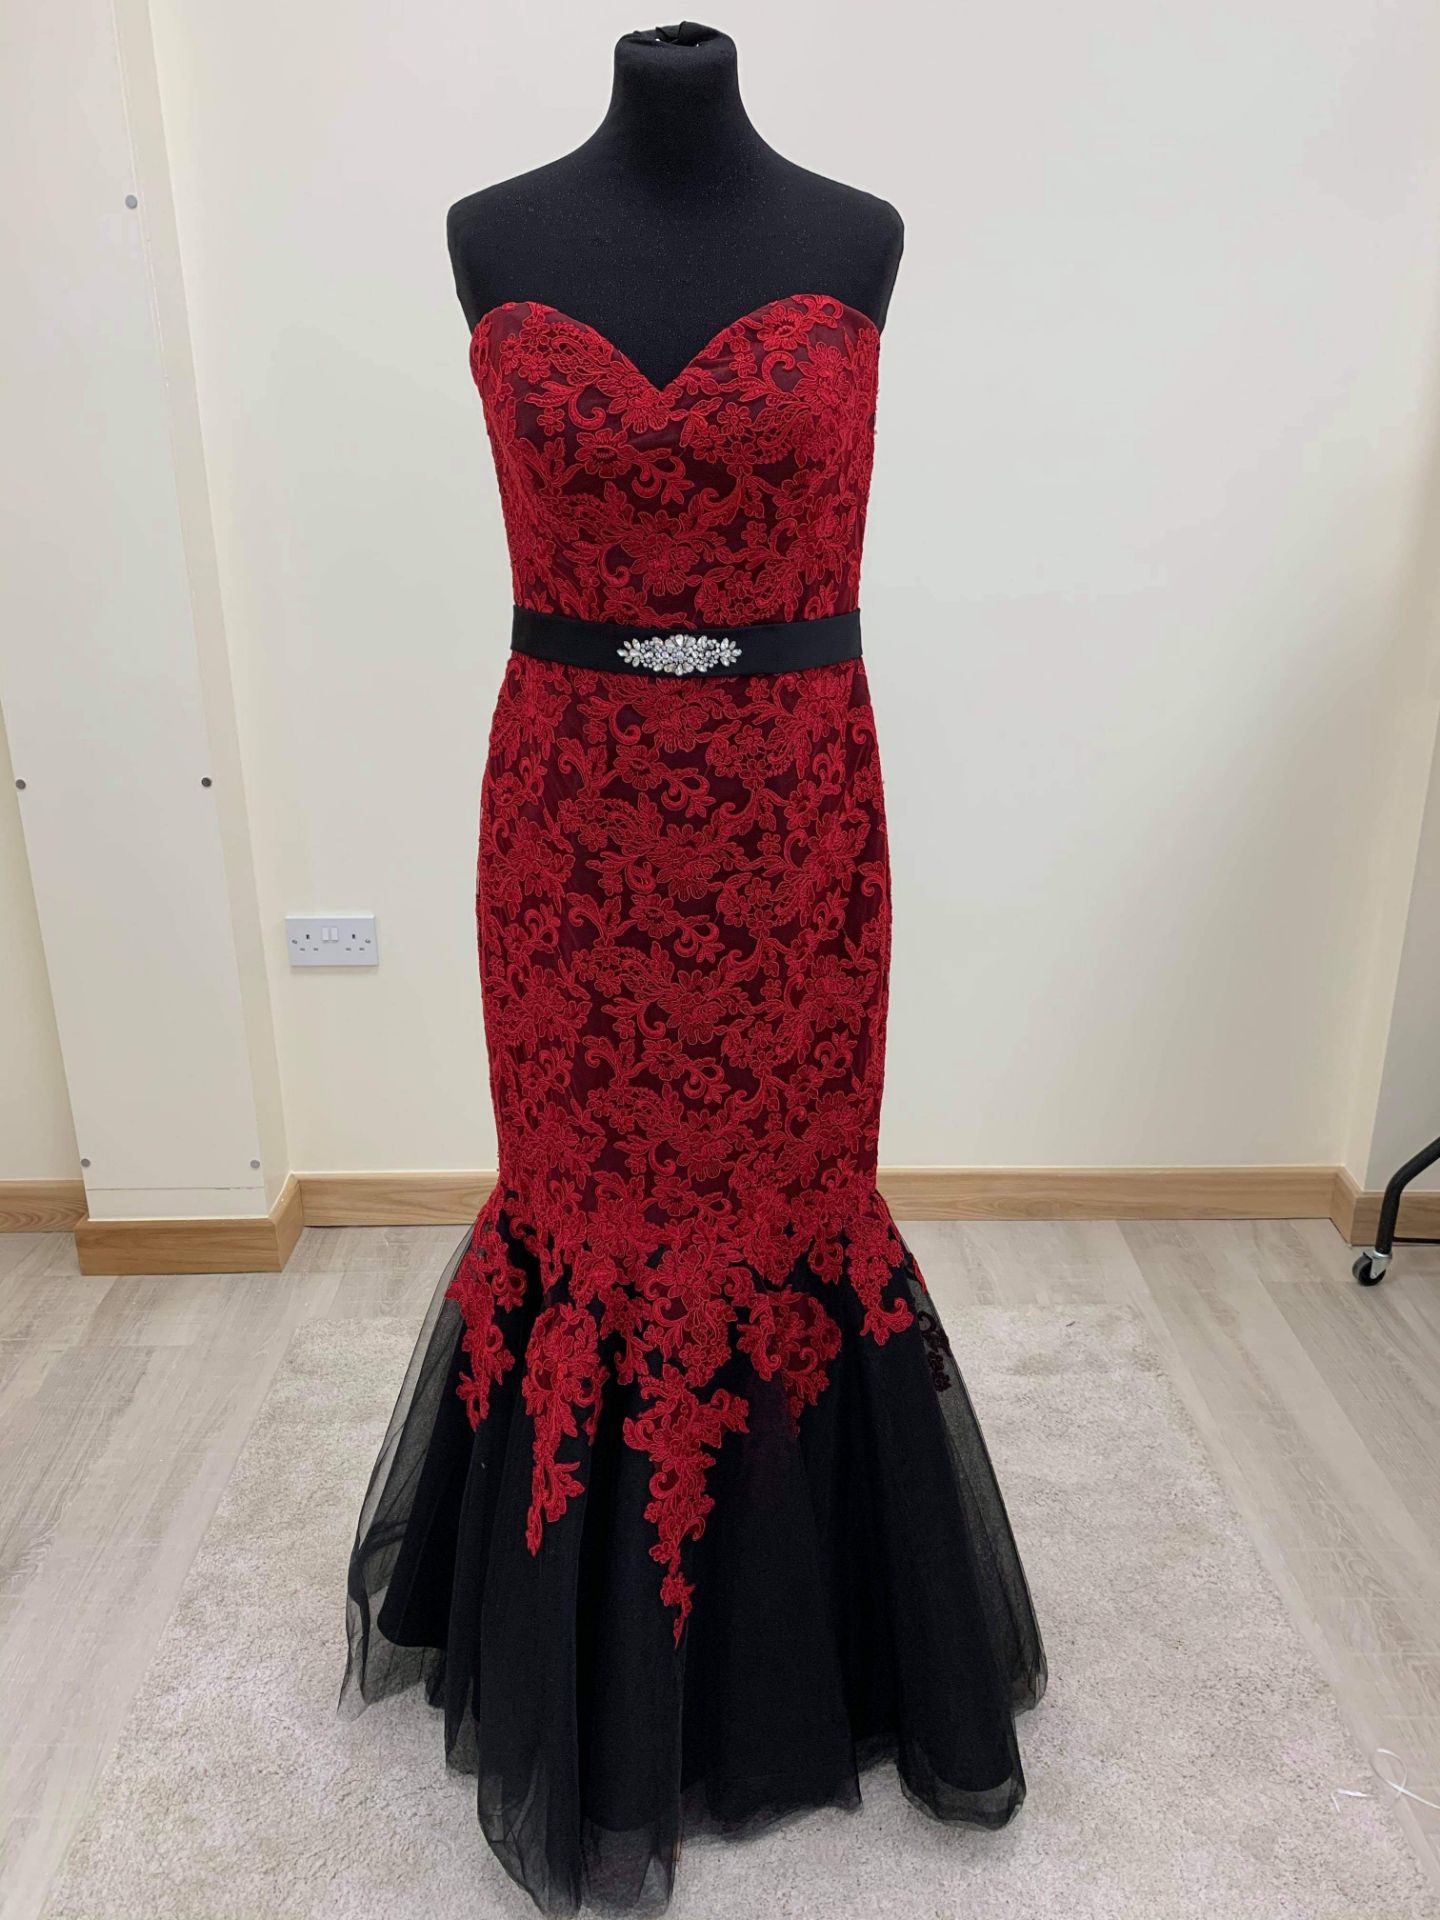 Red and Black Venus Wedding Dress RRP £895 Size 12 - Image 5 of 5